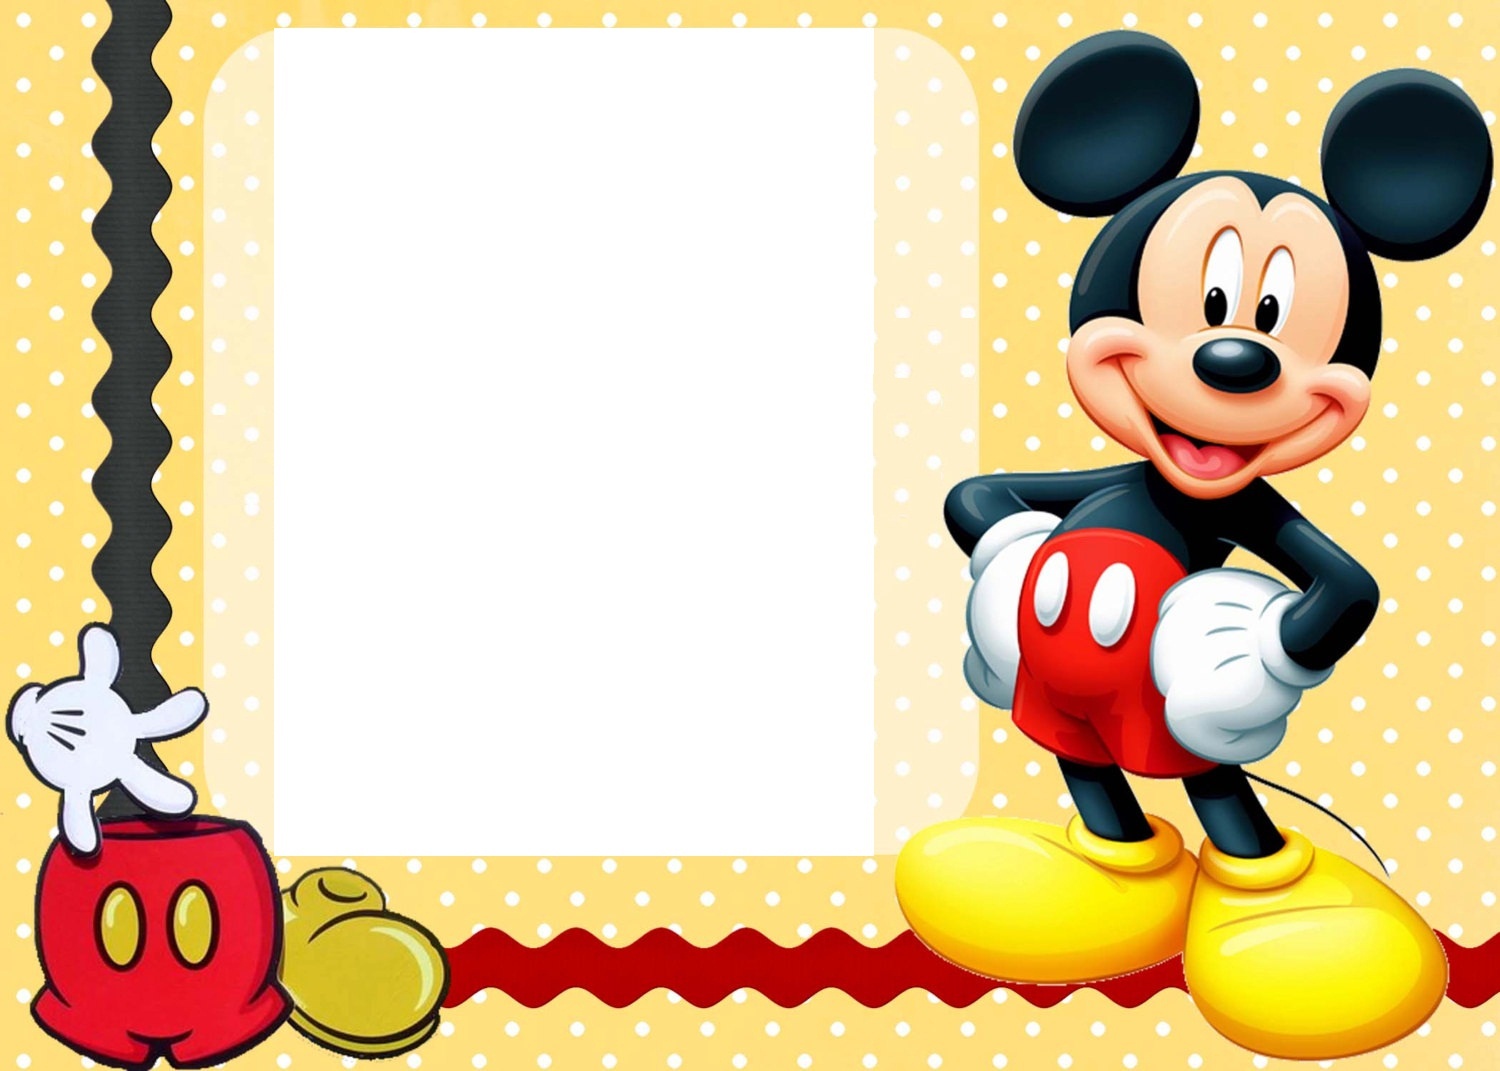 Free Mickey Mouse Template, Download Free Clip Art, Free Clip Art On - Free Printable Mickey Mouse Invitations